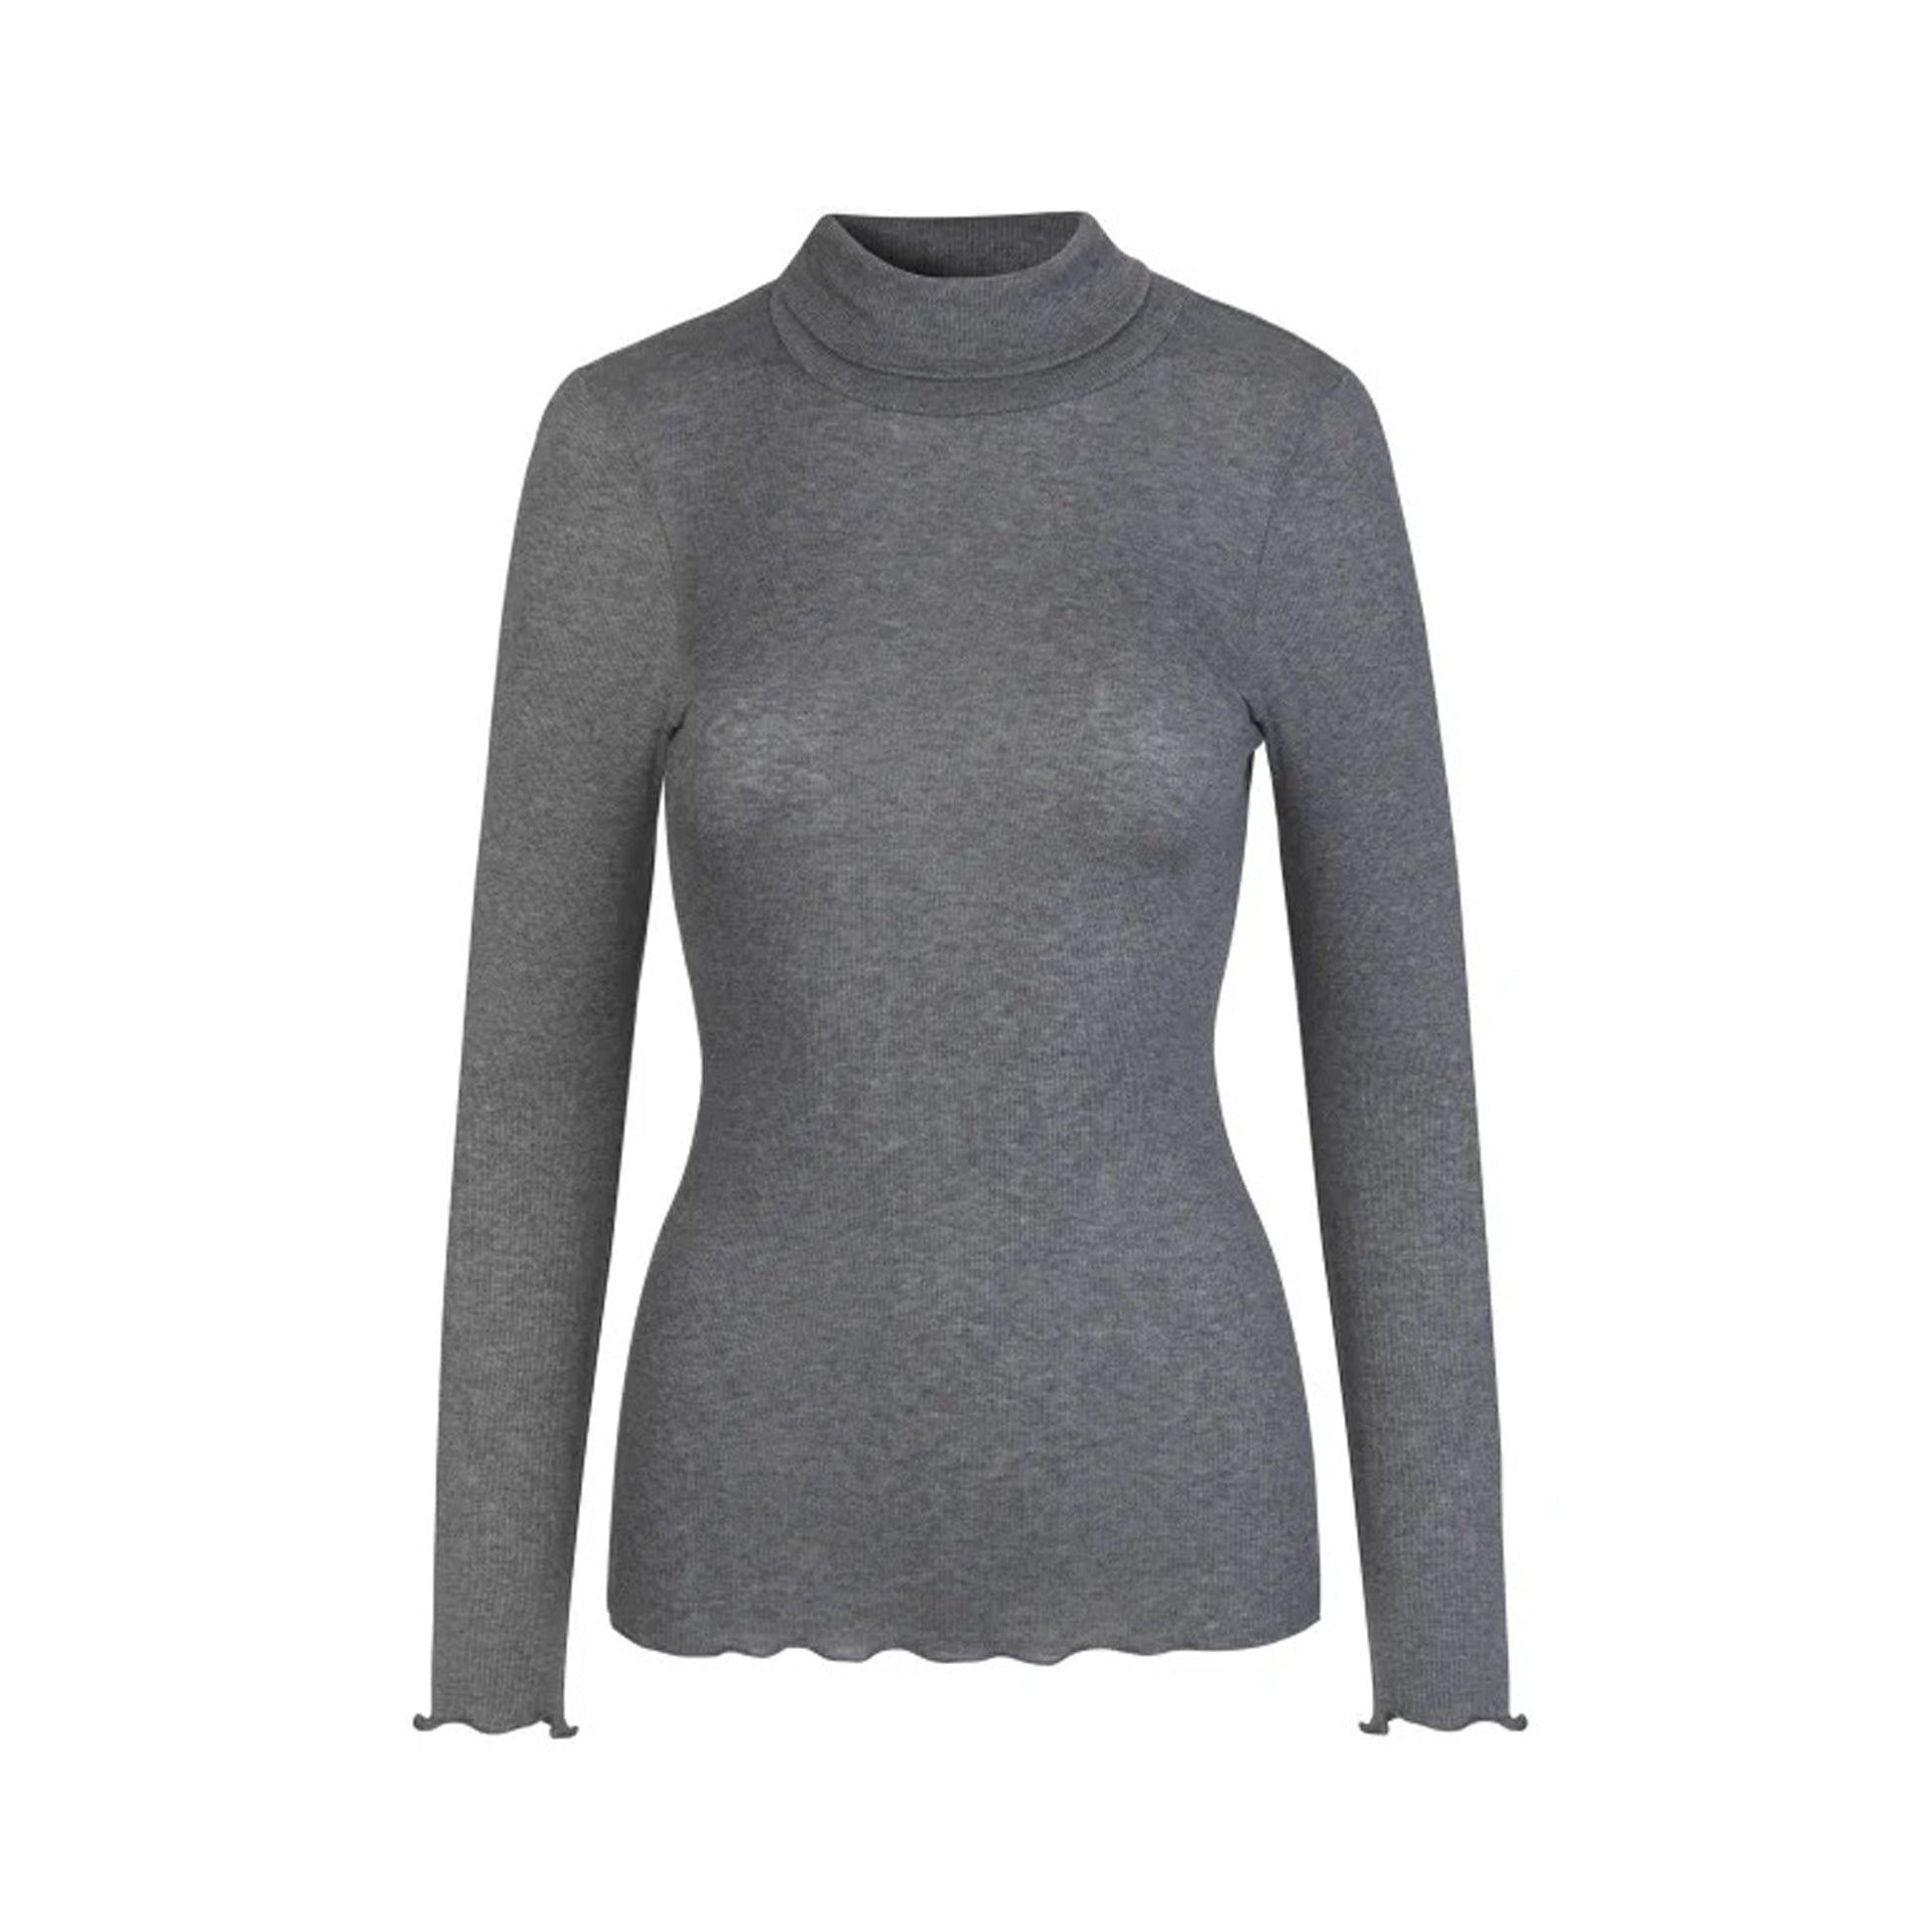 A Rosemunde Wool Turtleneck, perfect for cooler weather.